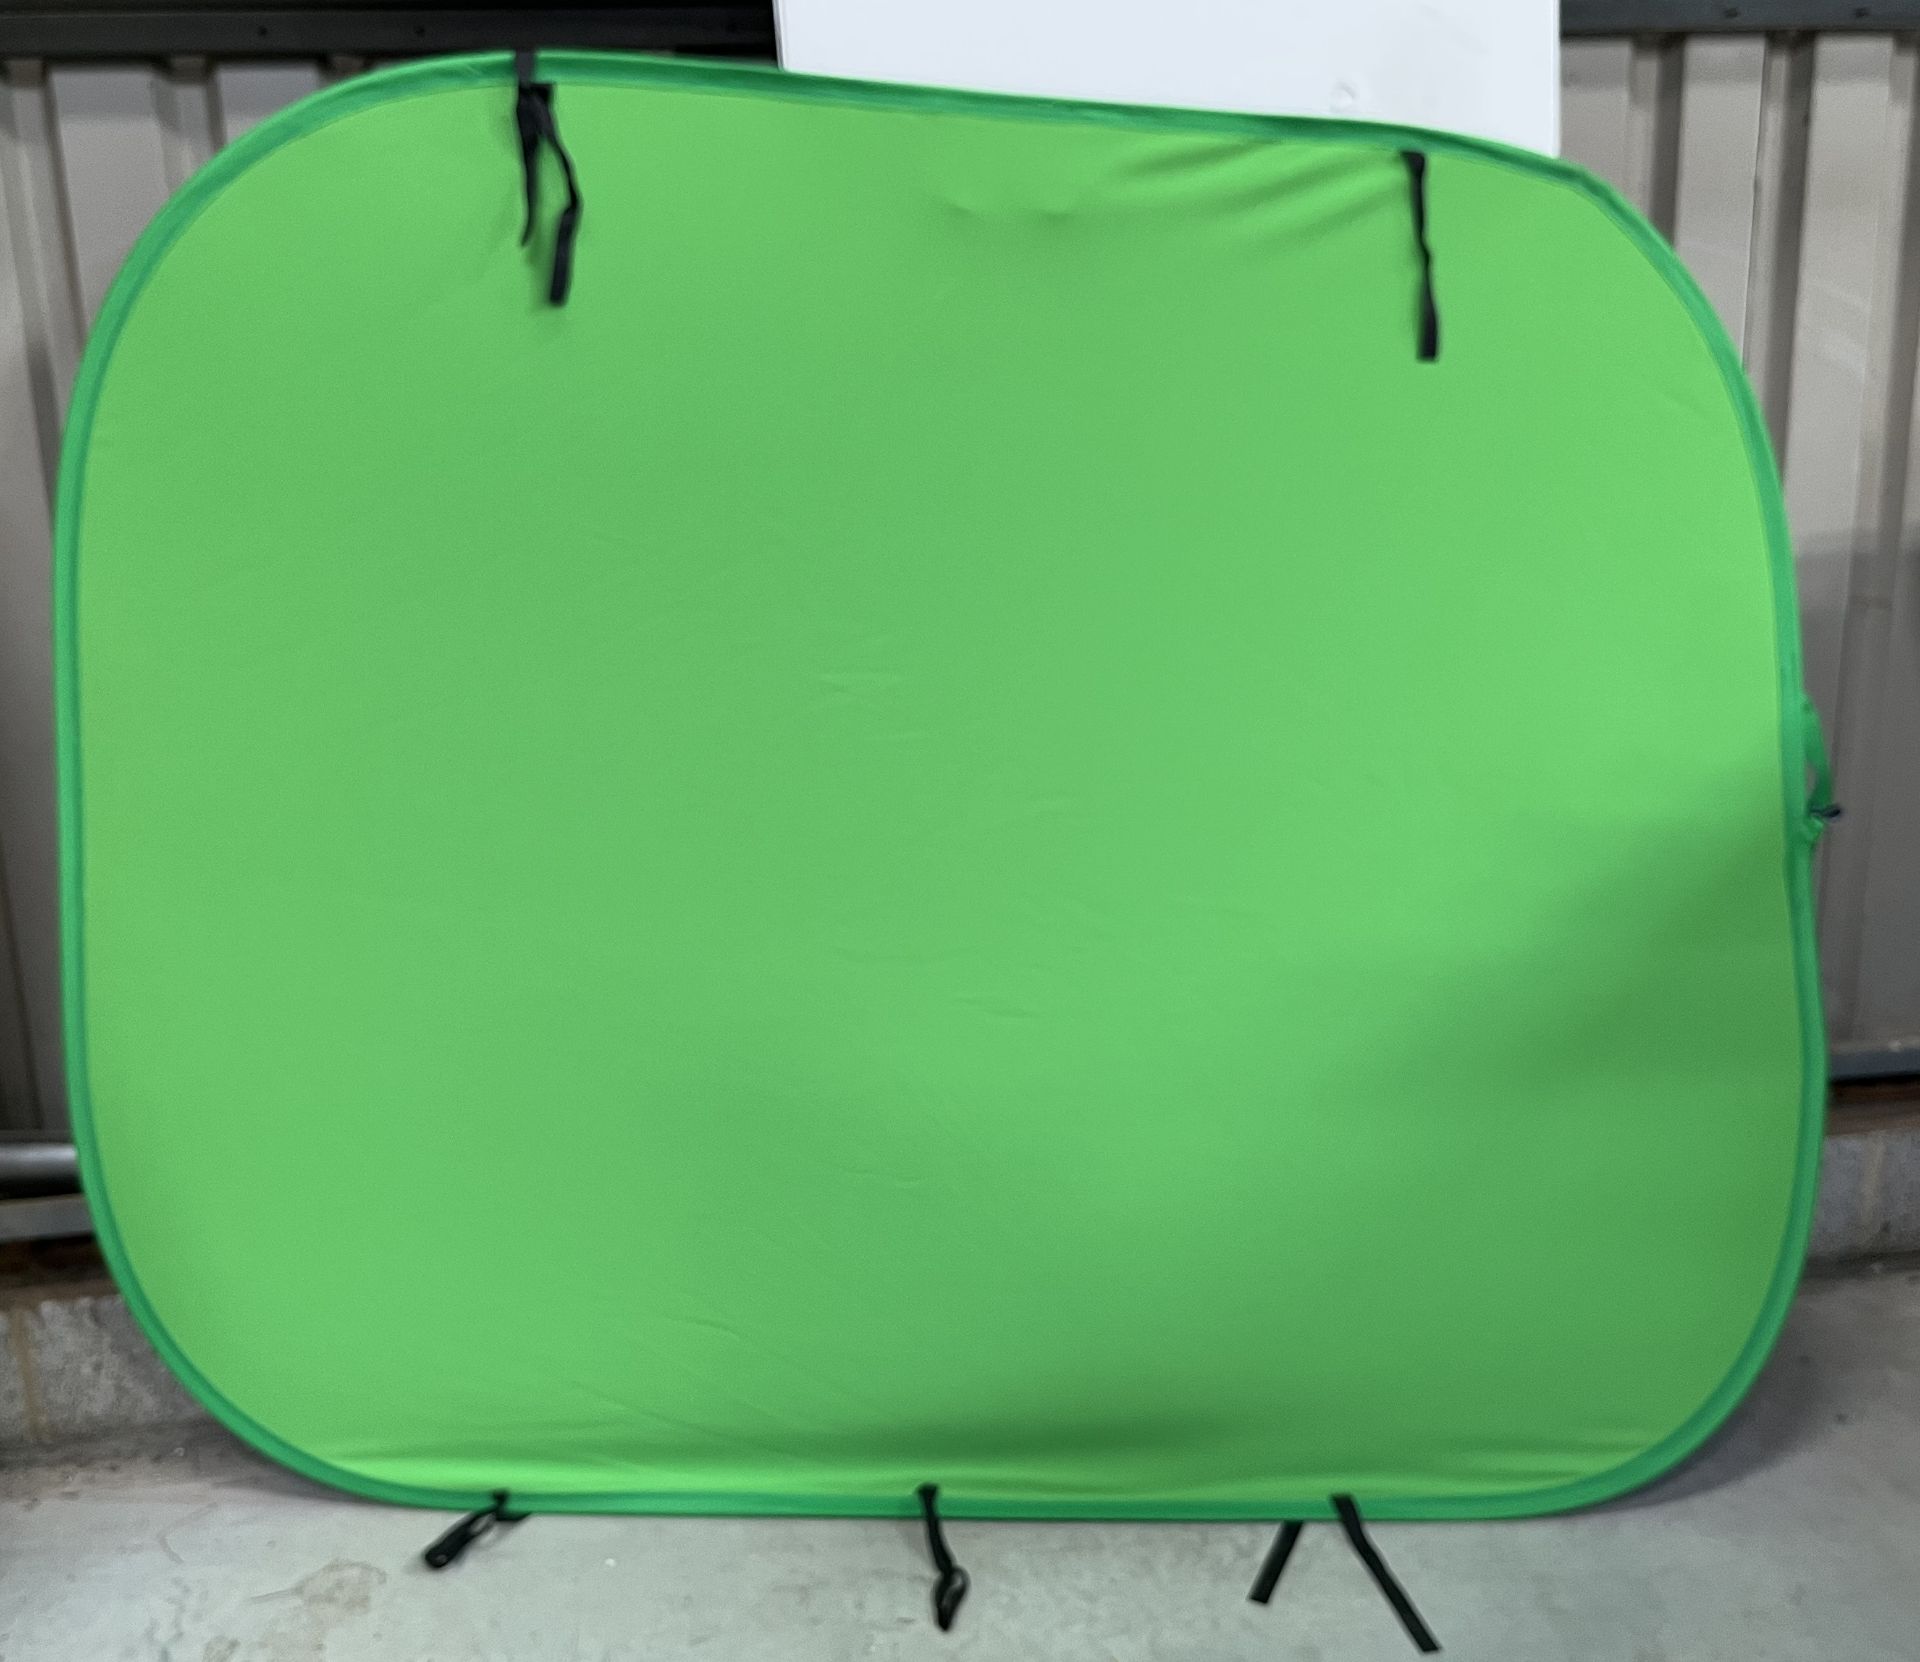 Lastolite Green Screen & Reflective Sheet (Location Brentwood. Please Refer to General Notes)